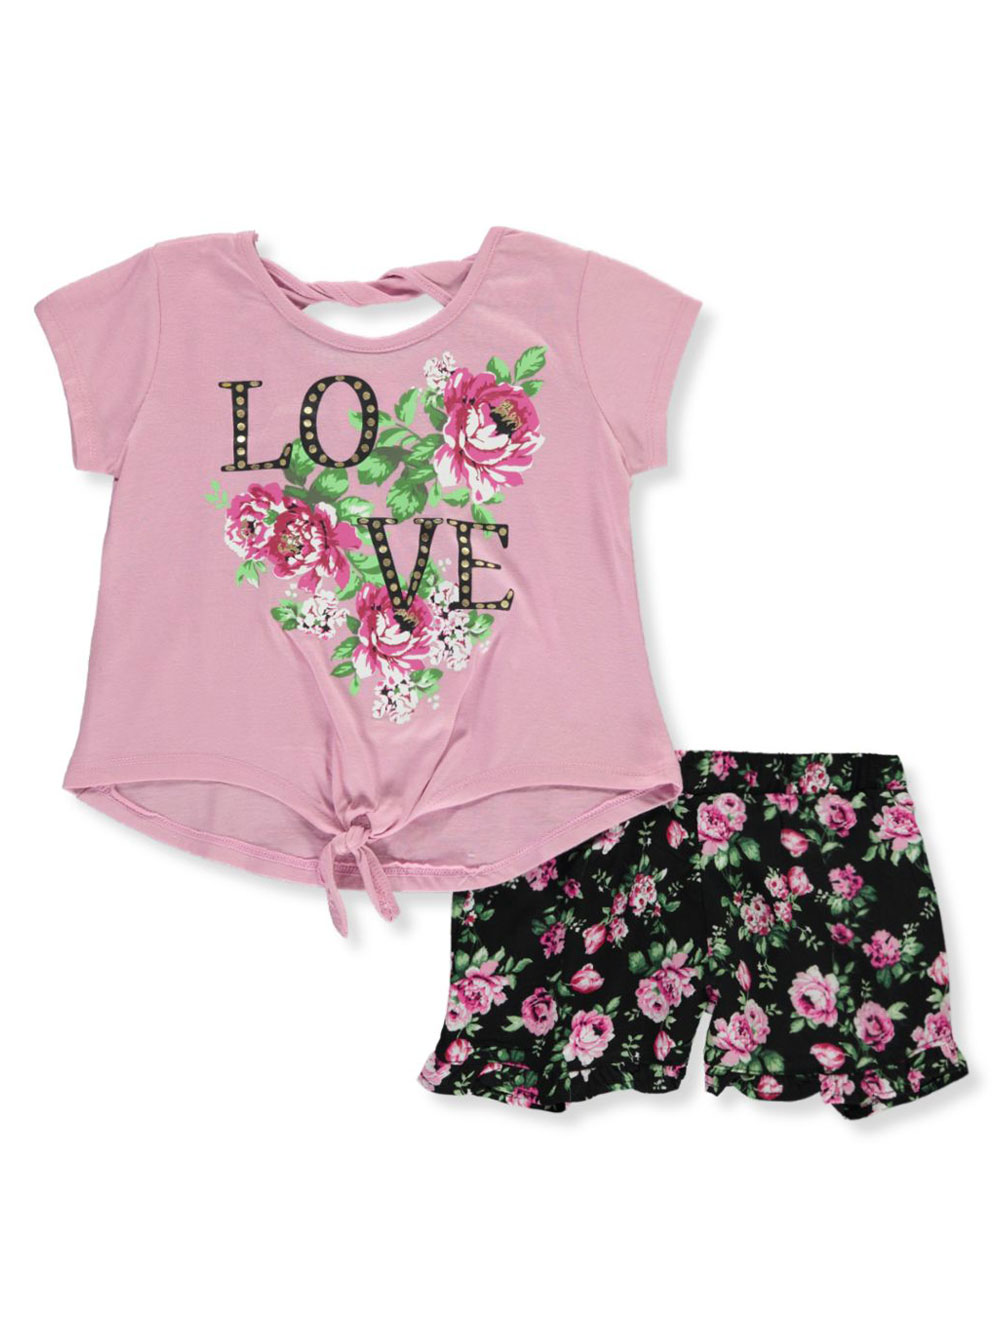 Size 8 Sets for Girls